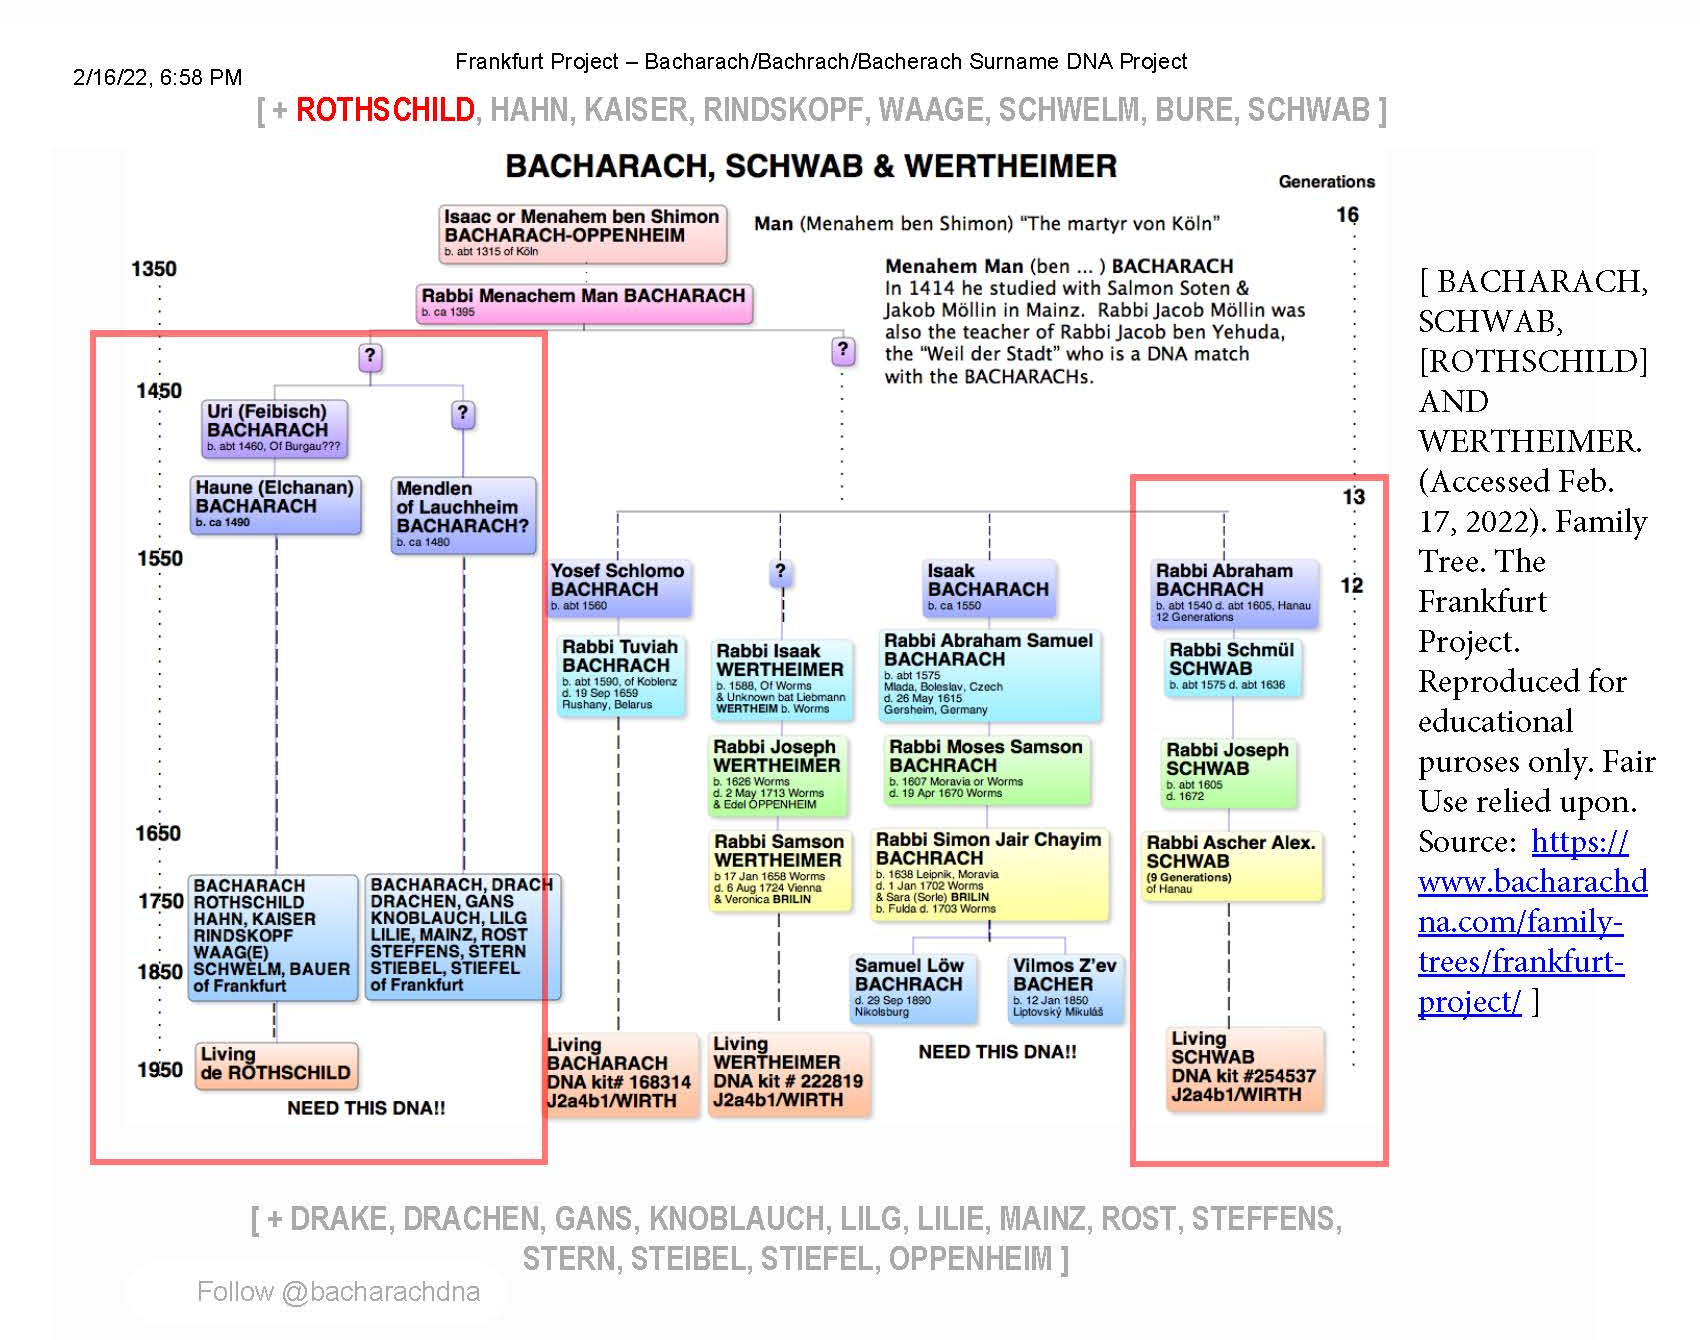 BACHARACH, SCHWAB, [ROTHSCHILD] AND WERTHEIMER. (Accessed Feb. 17, 2022). Family Tree. The Frankfurt Project.